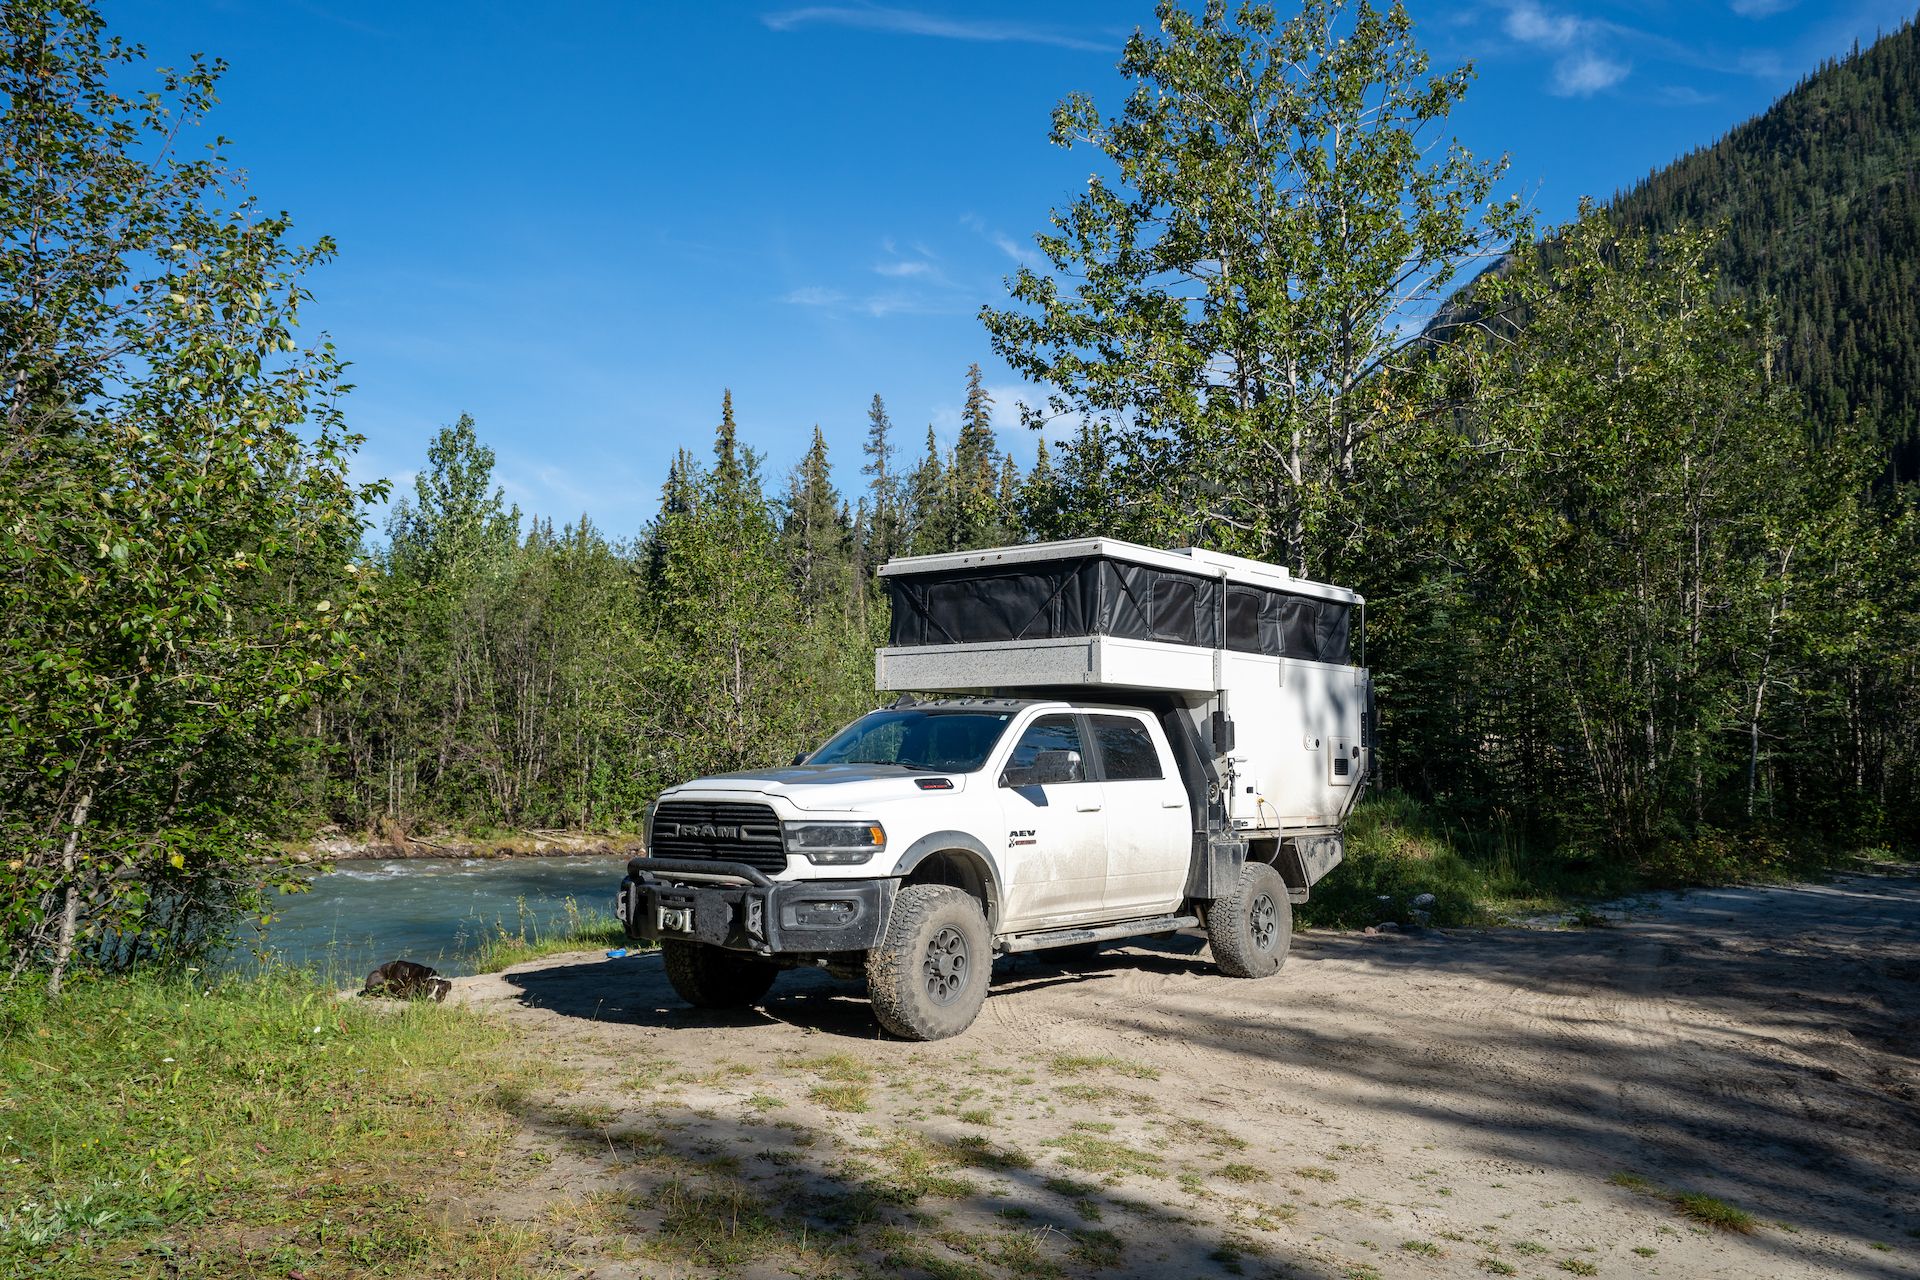 We camped at several beautiful free and remote campsites along the way. Social distancing!